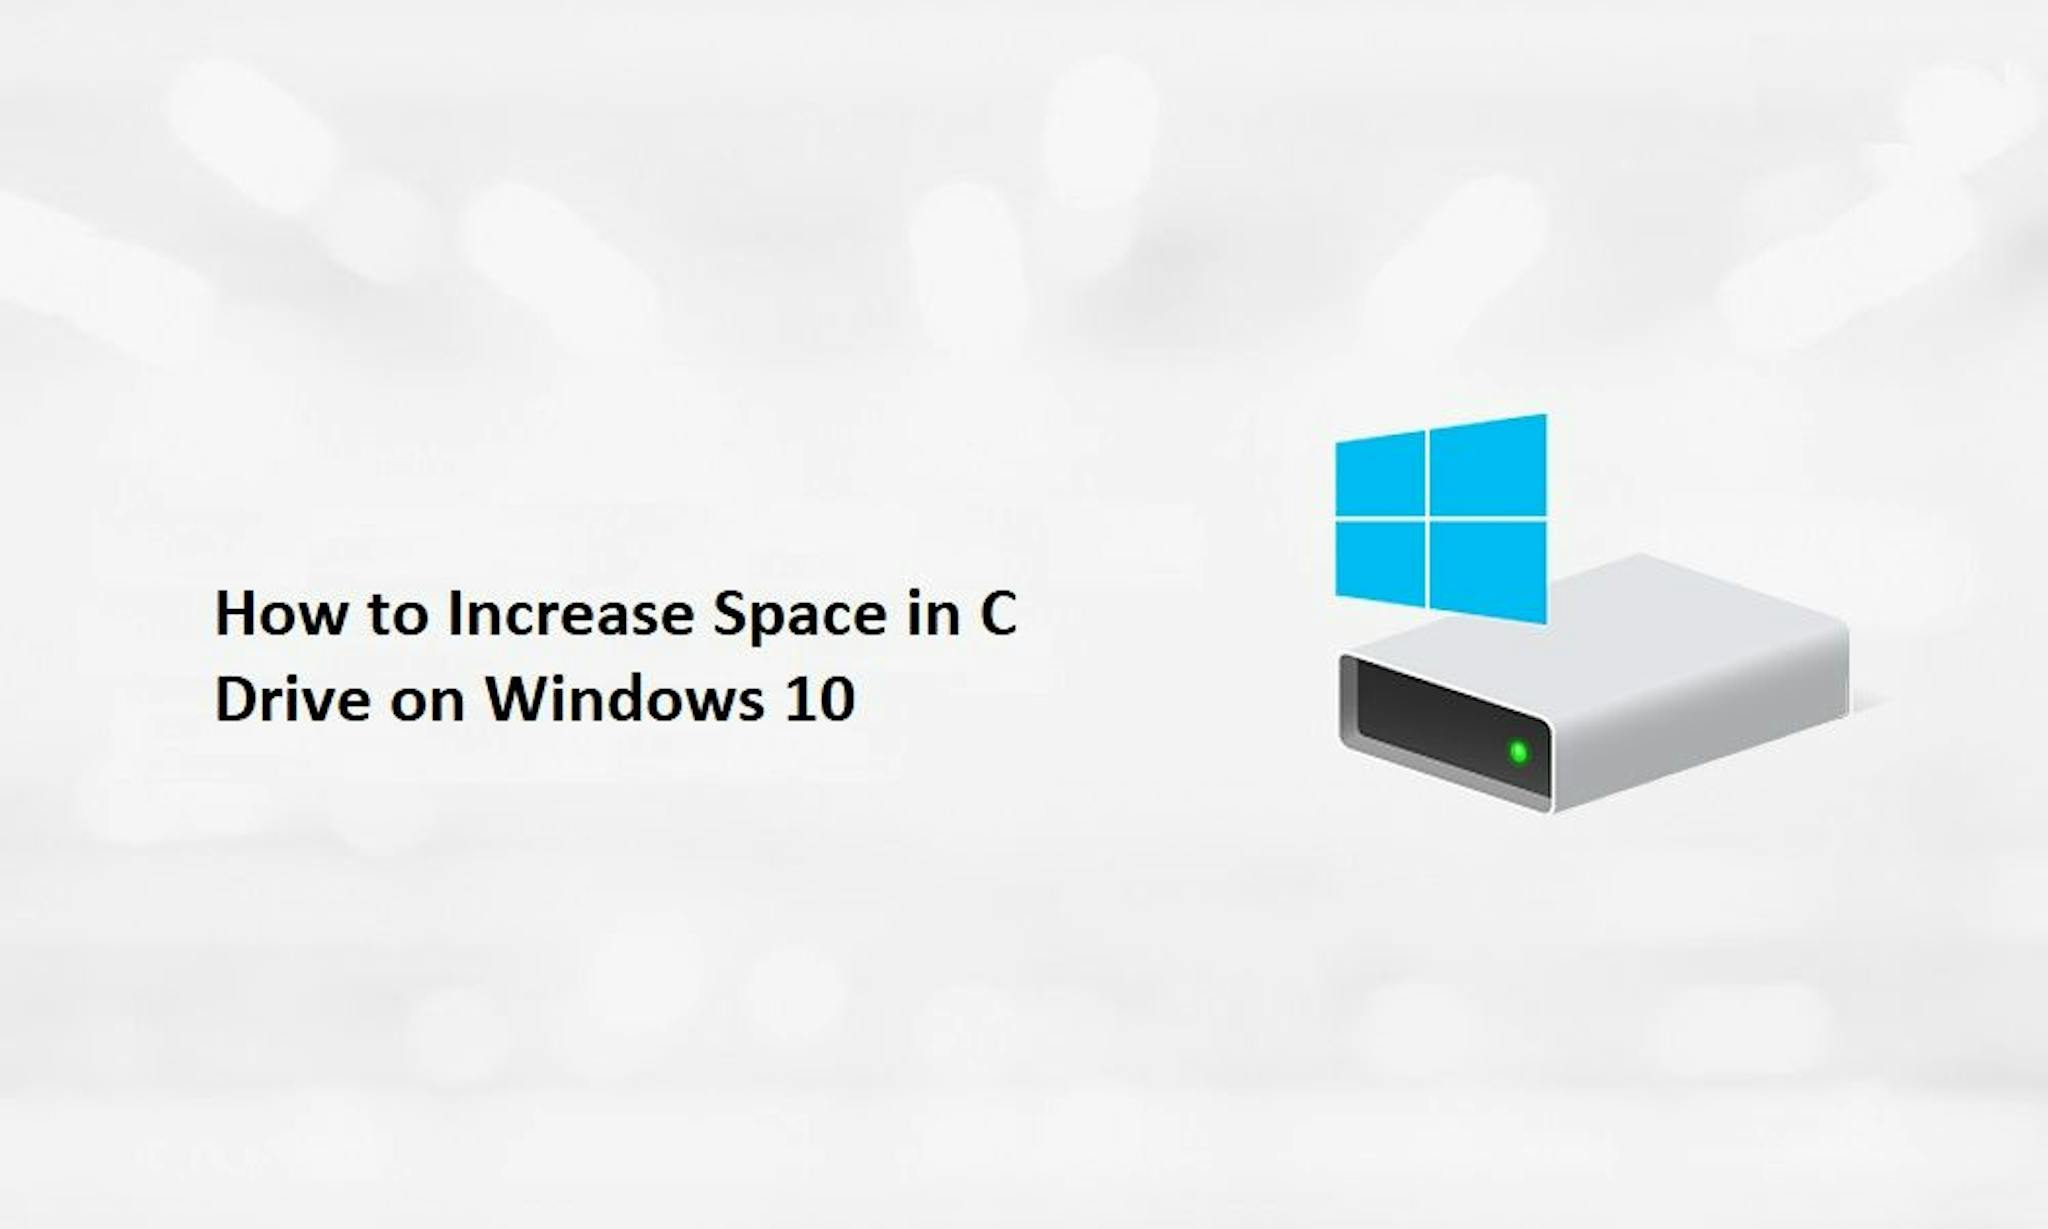 featured image - How to Increase Space in C Drive on Windows 10 Without Losing Data